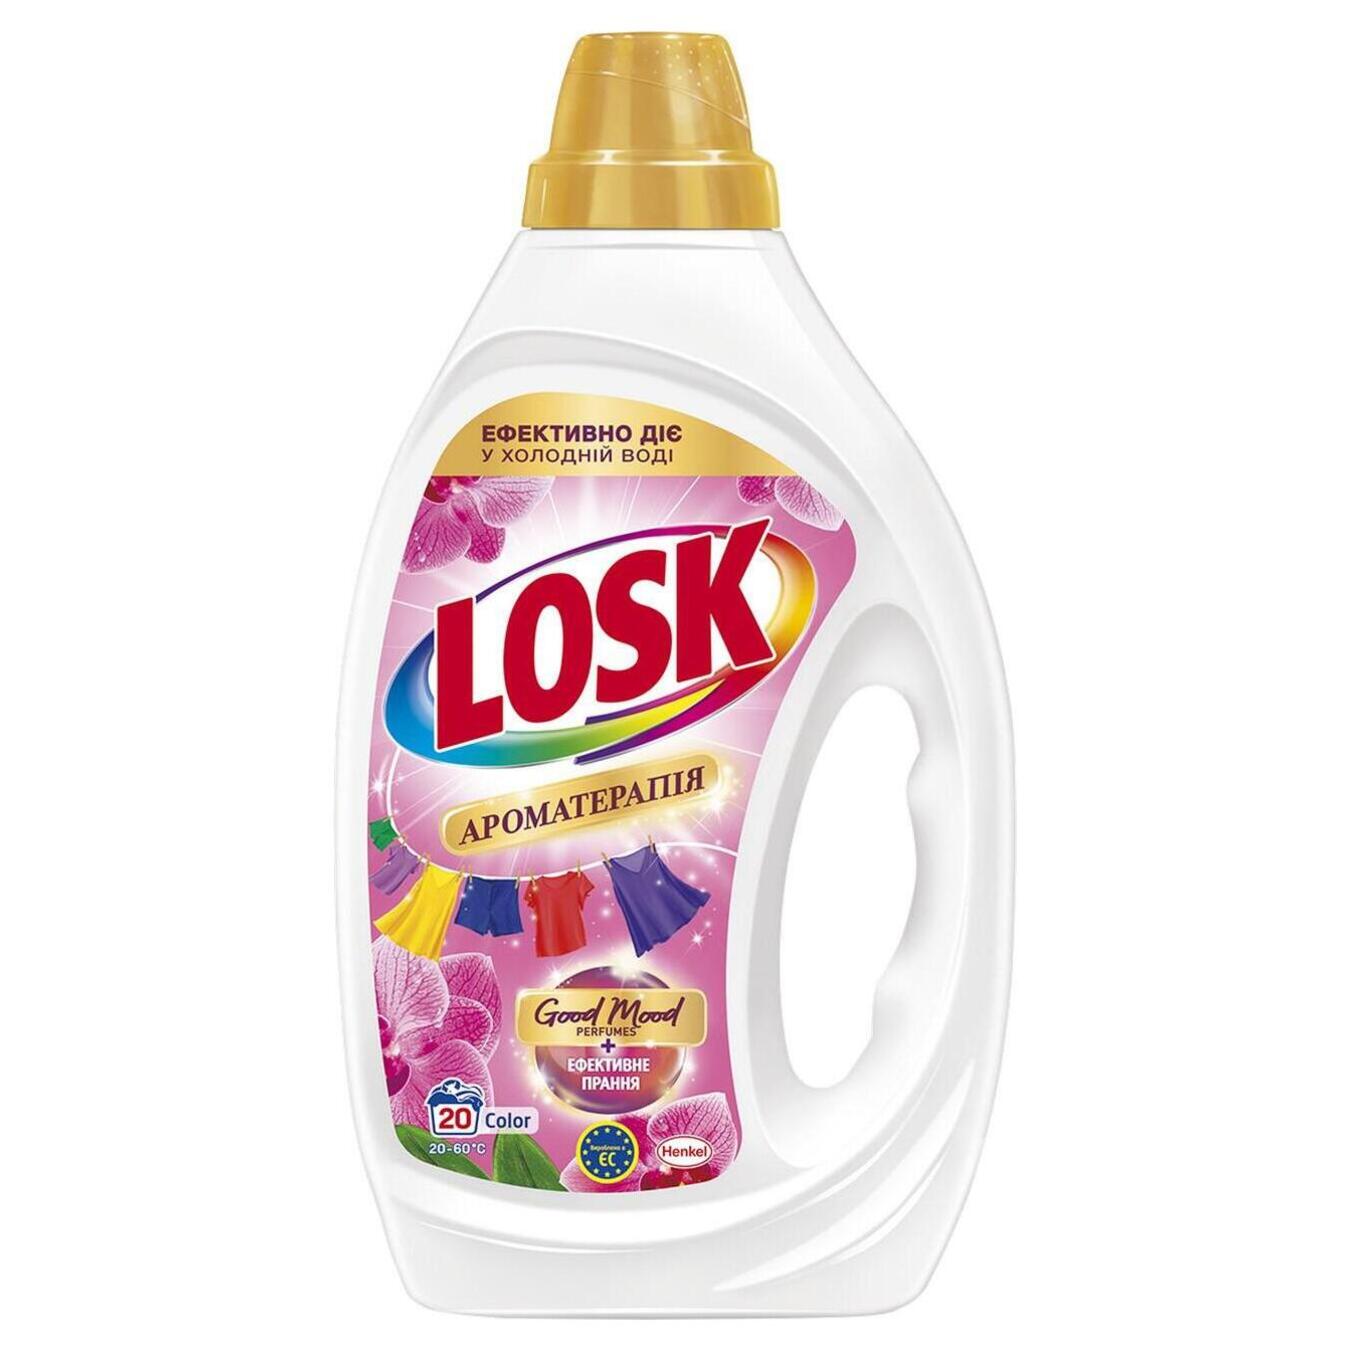 Washing gel Losk JSC Essential oils and aroma of Malaysian flower 0.9 l